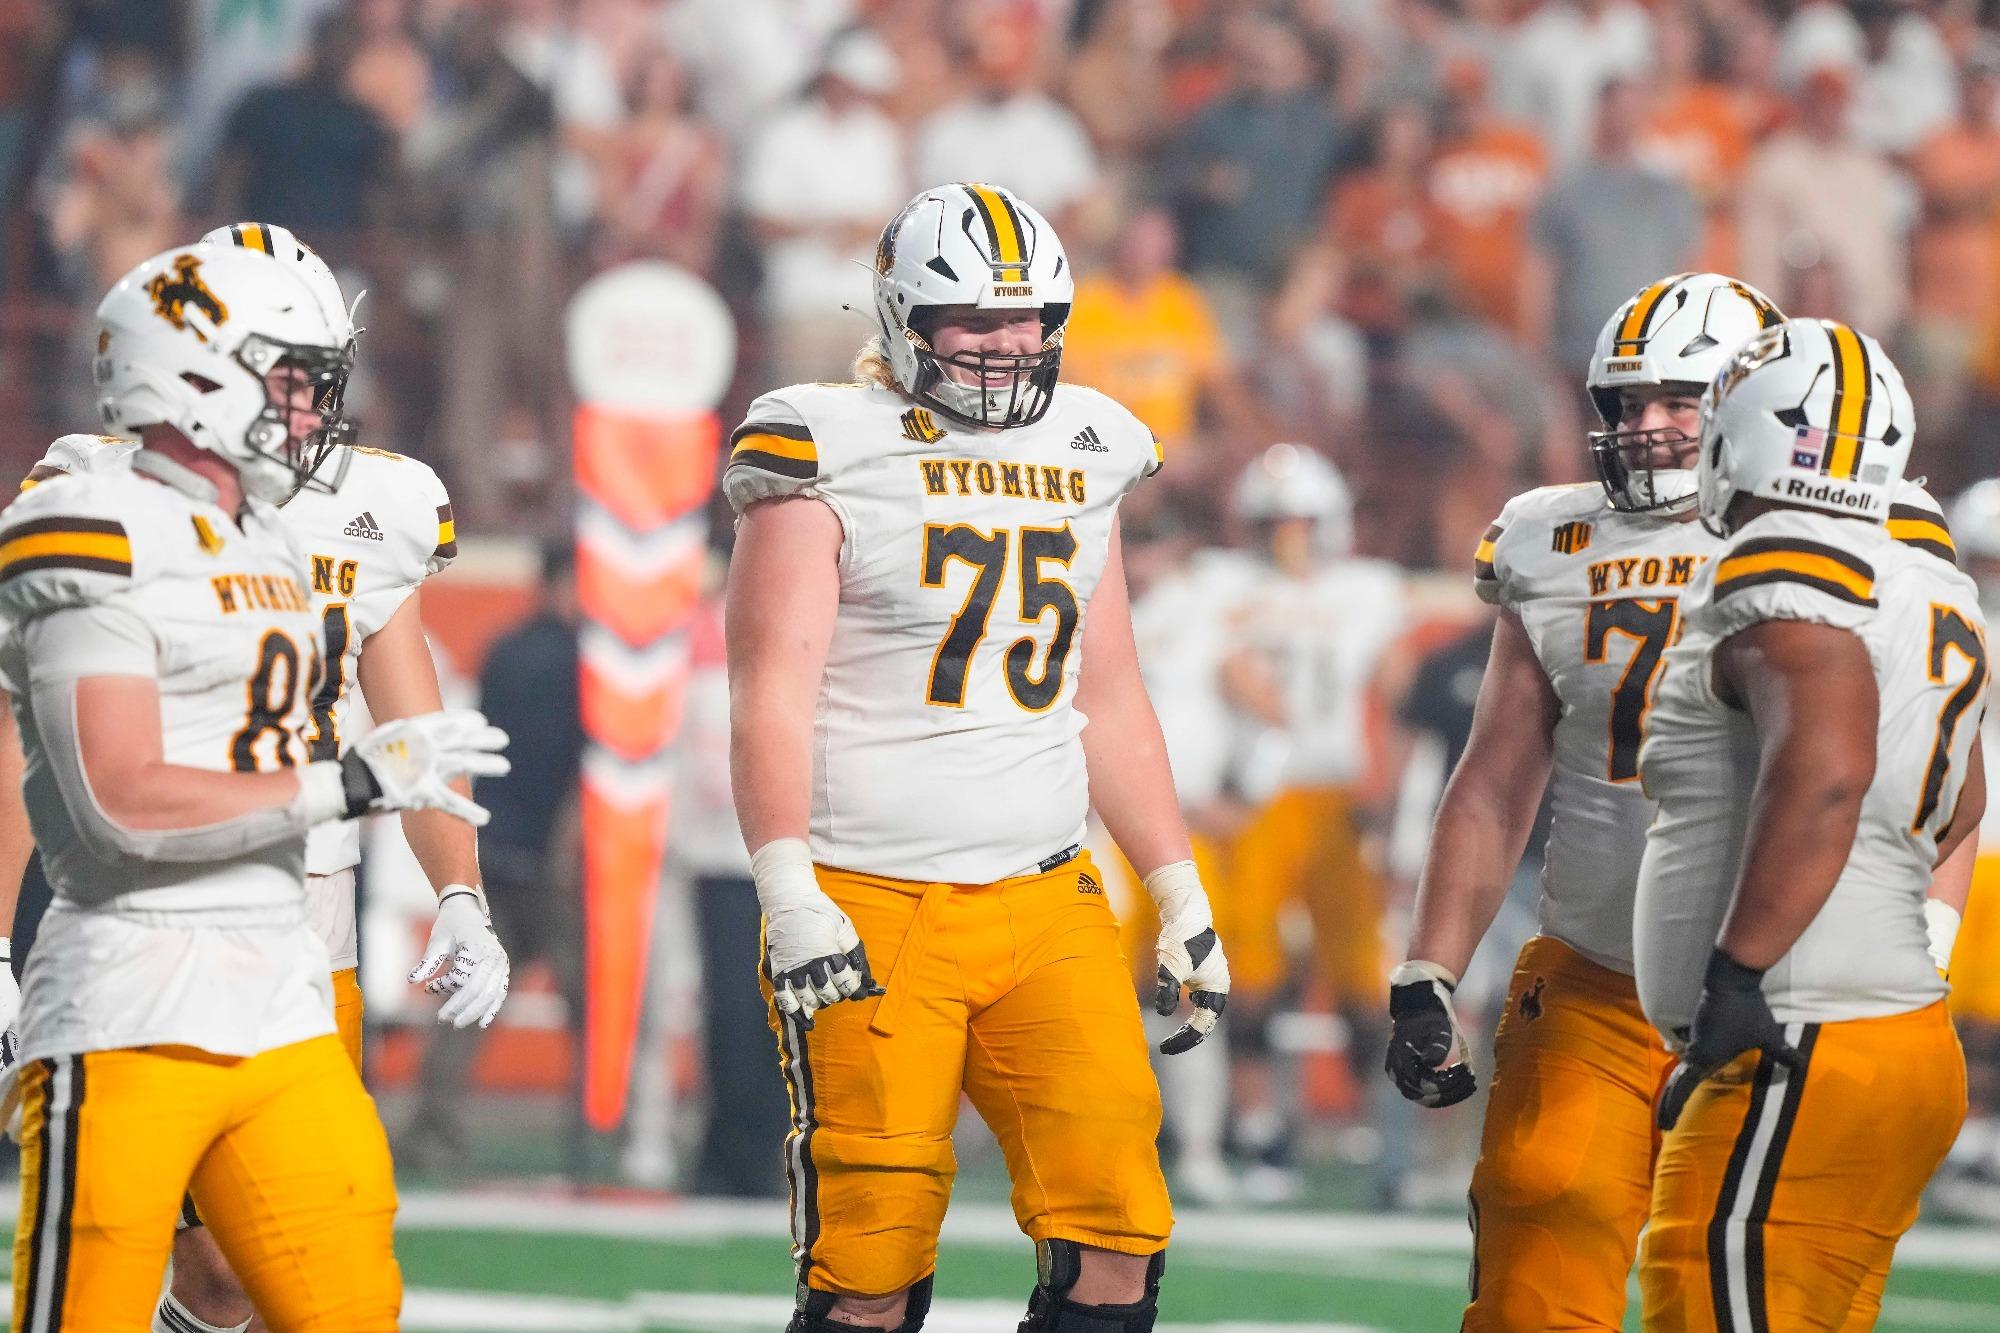 Frank Crum is a giant offensive tackle for Wyoming whose experience and toughness has garnered the attention of many scouts. Senior Hula Bowl scout Mike Bey breaks down Crum as an NFL Prospect in his report.